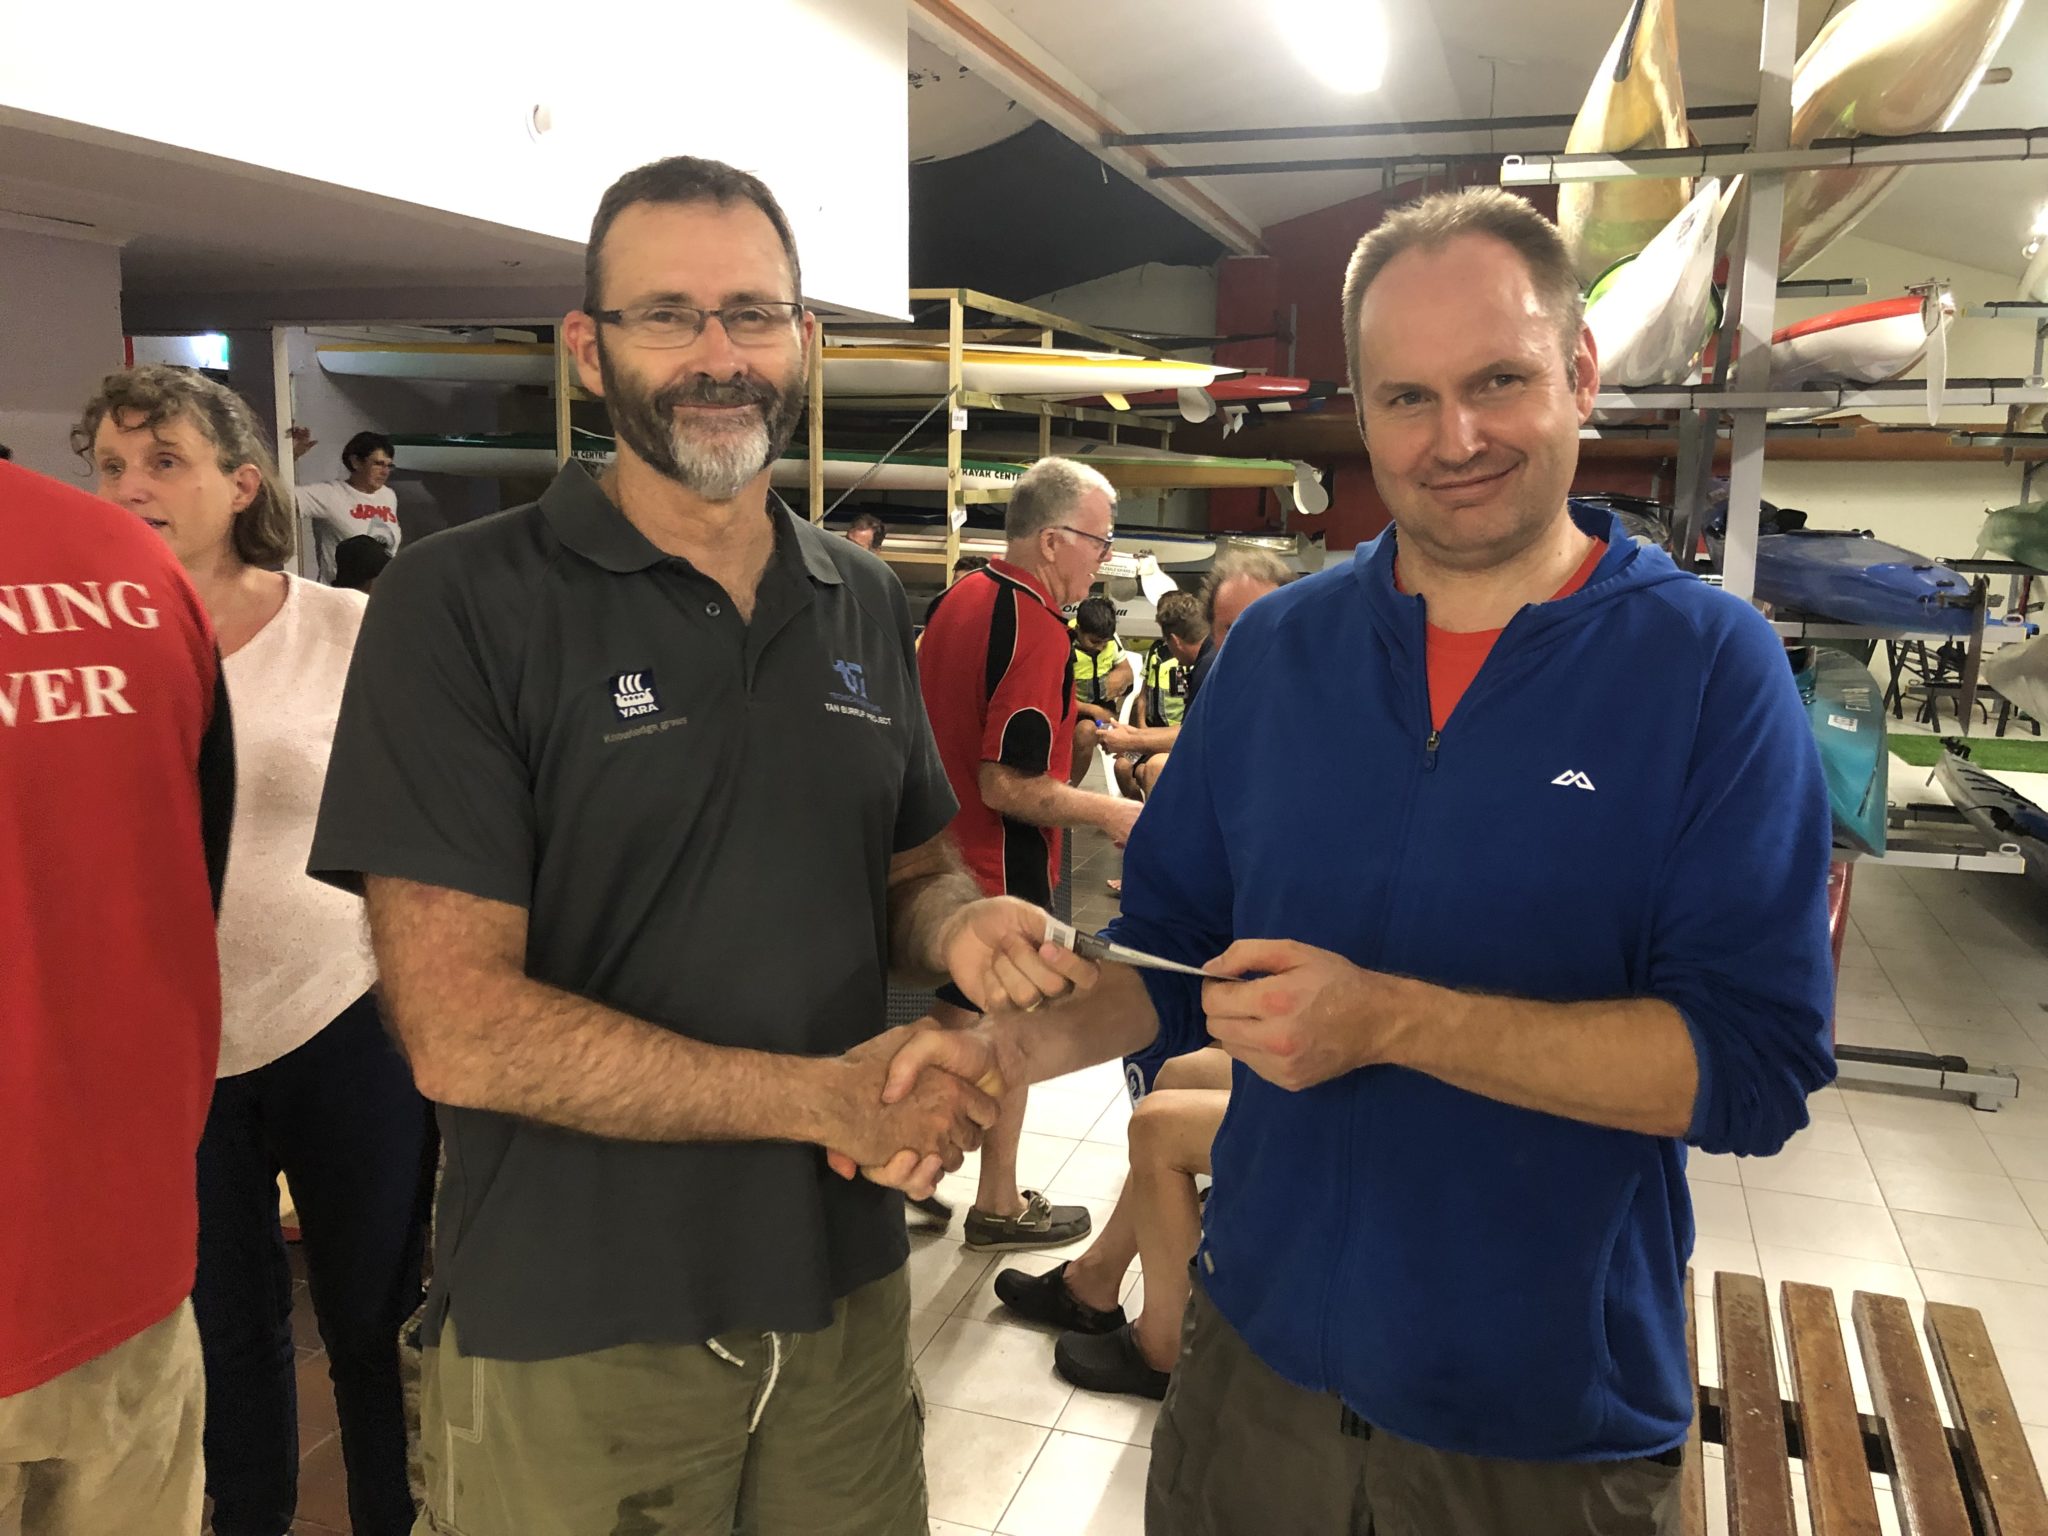 Tuesday 5th March 2019 : Tonight’s photo shows club member Alan Ings presenting Keiran English with the winners movie voucher